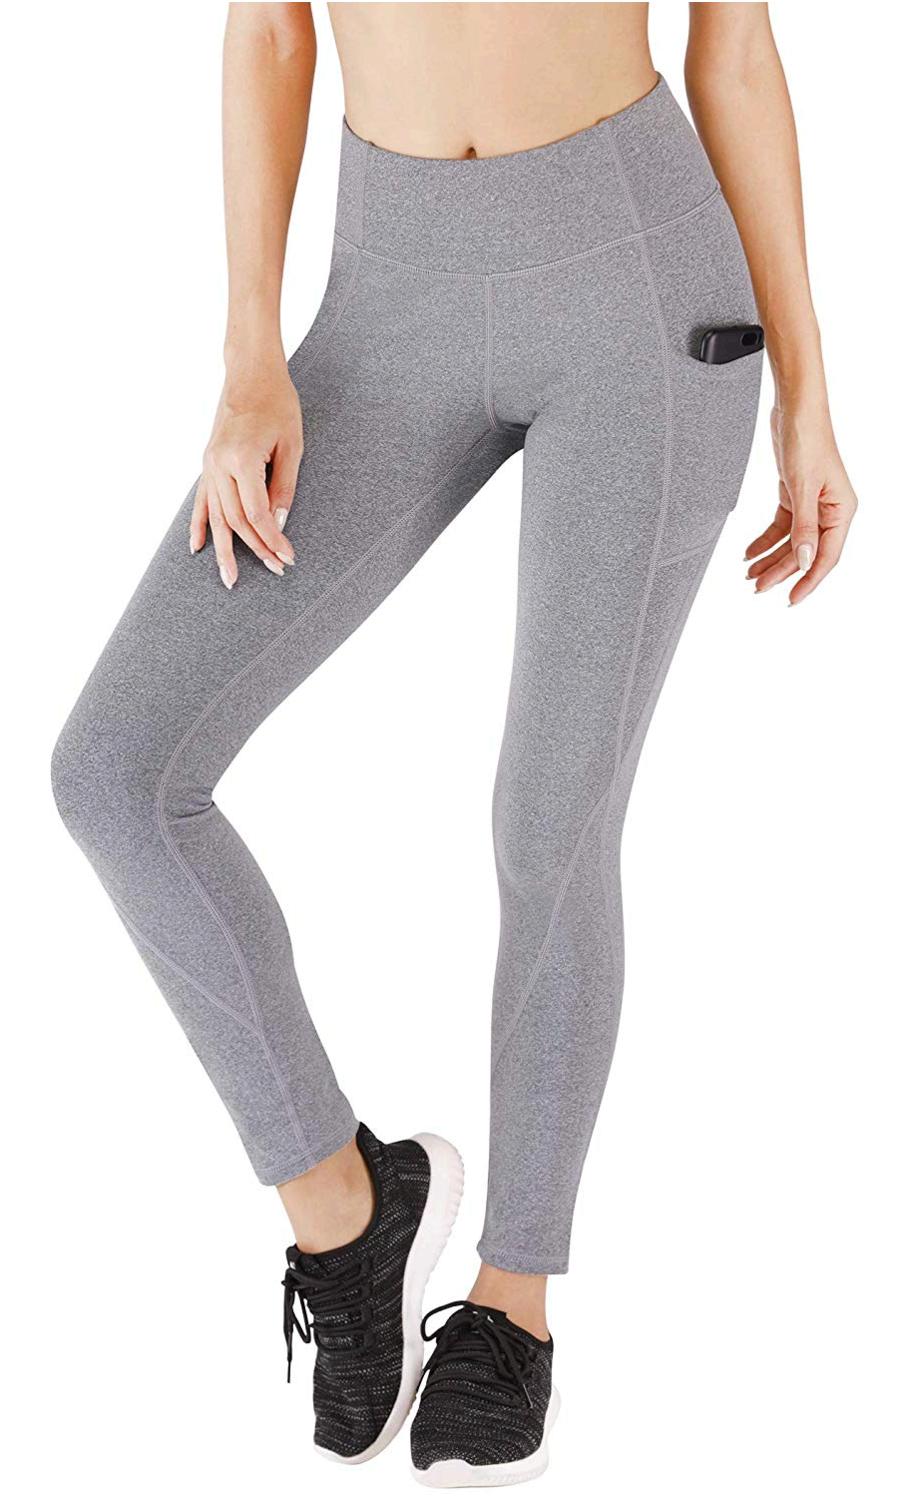 https://images.shoefabs.com/pp-dc77462c/l/f18cf0753acf9b/Heathyoga-Yoga-Pants-with-Pockets-Extra-Soft-Leggings-with-Pockets-for-Women-Non-See-Through-High-Waist-Workout-Leggings-H7521-Space-Dye-Grey-f18cf0753acf9b.jpg